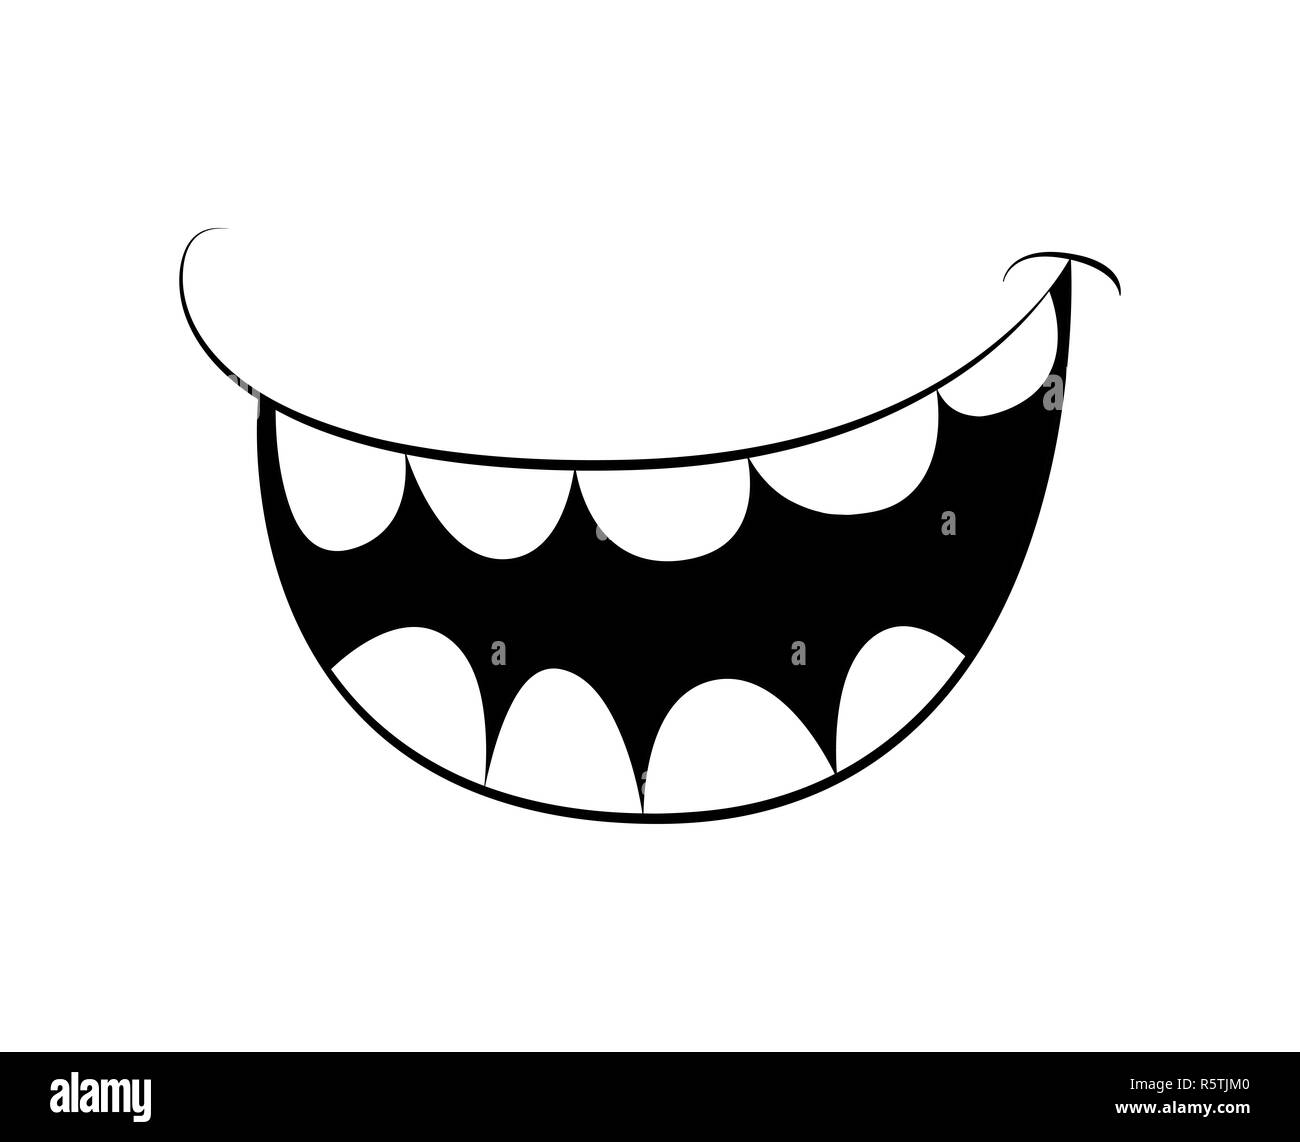 Cartoon Smile Mouth Lips With Teeth Vector Silhouette Outline